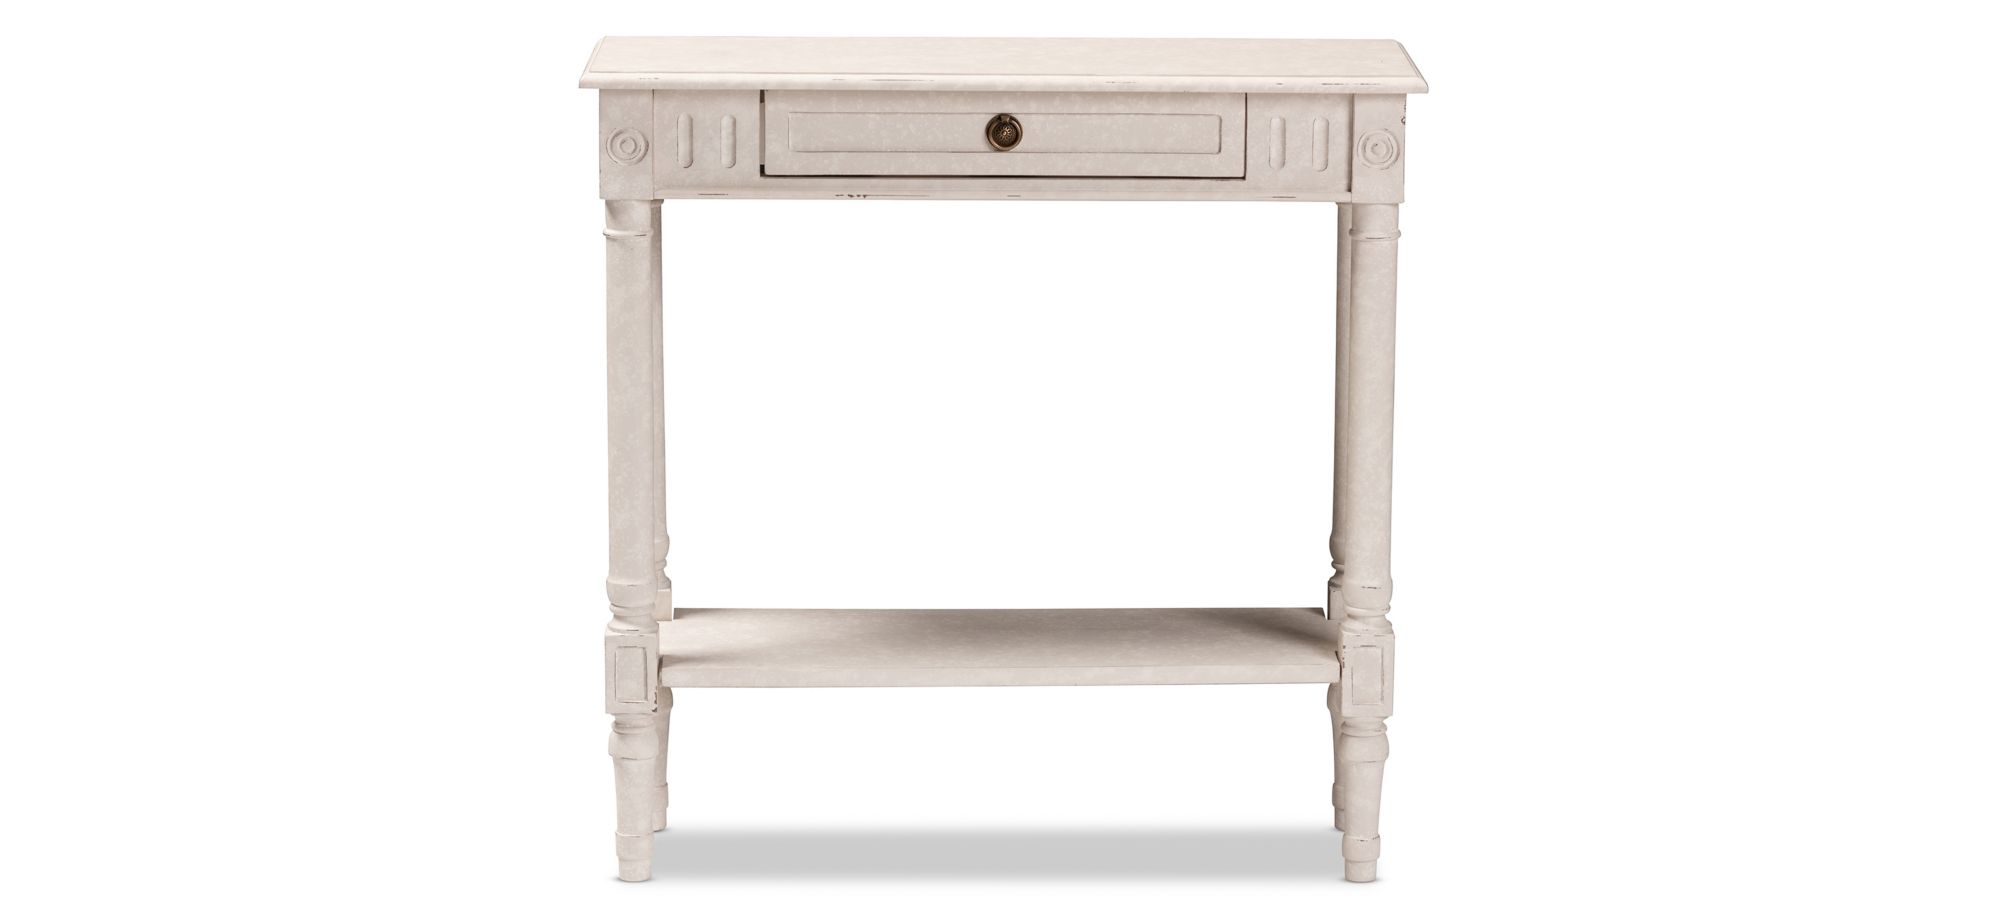 Ariella 1-Drawer Console Table in Whitewashed by Wholesale Interiors